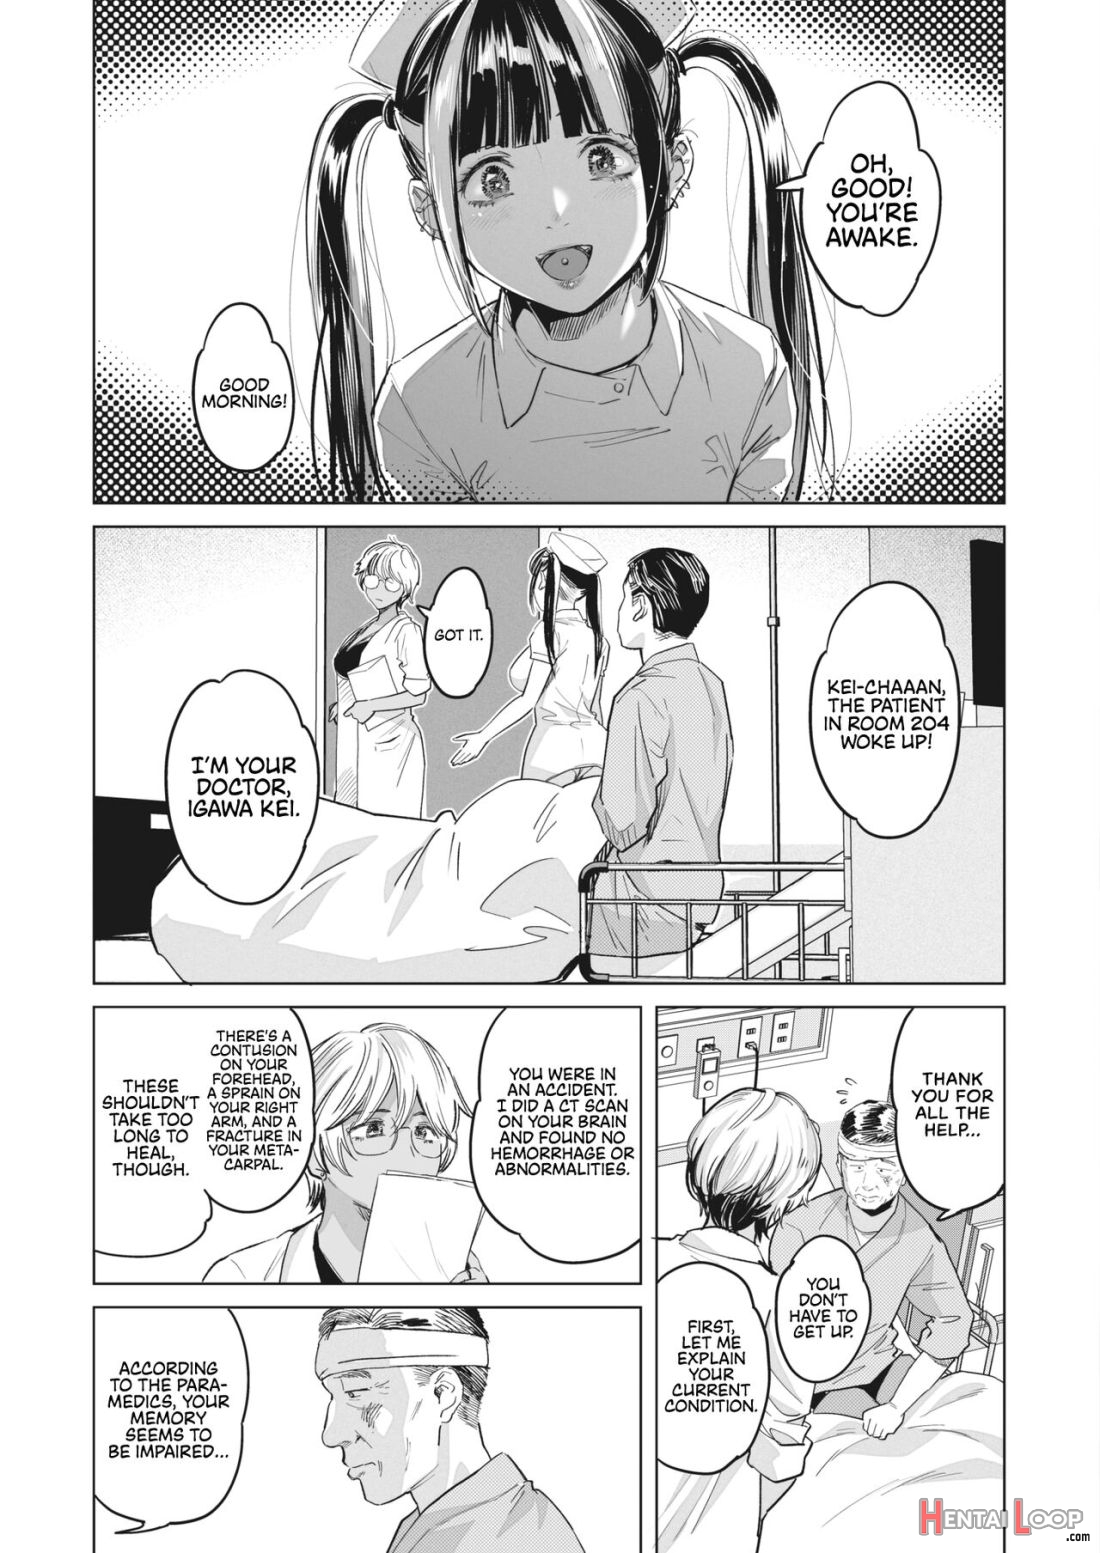 Galcli! Gals Clinic Ch. 3 -super Doctor Kei- page 3